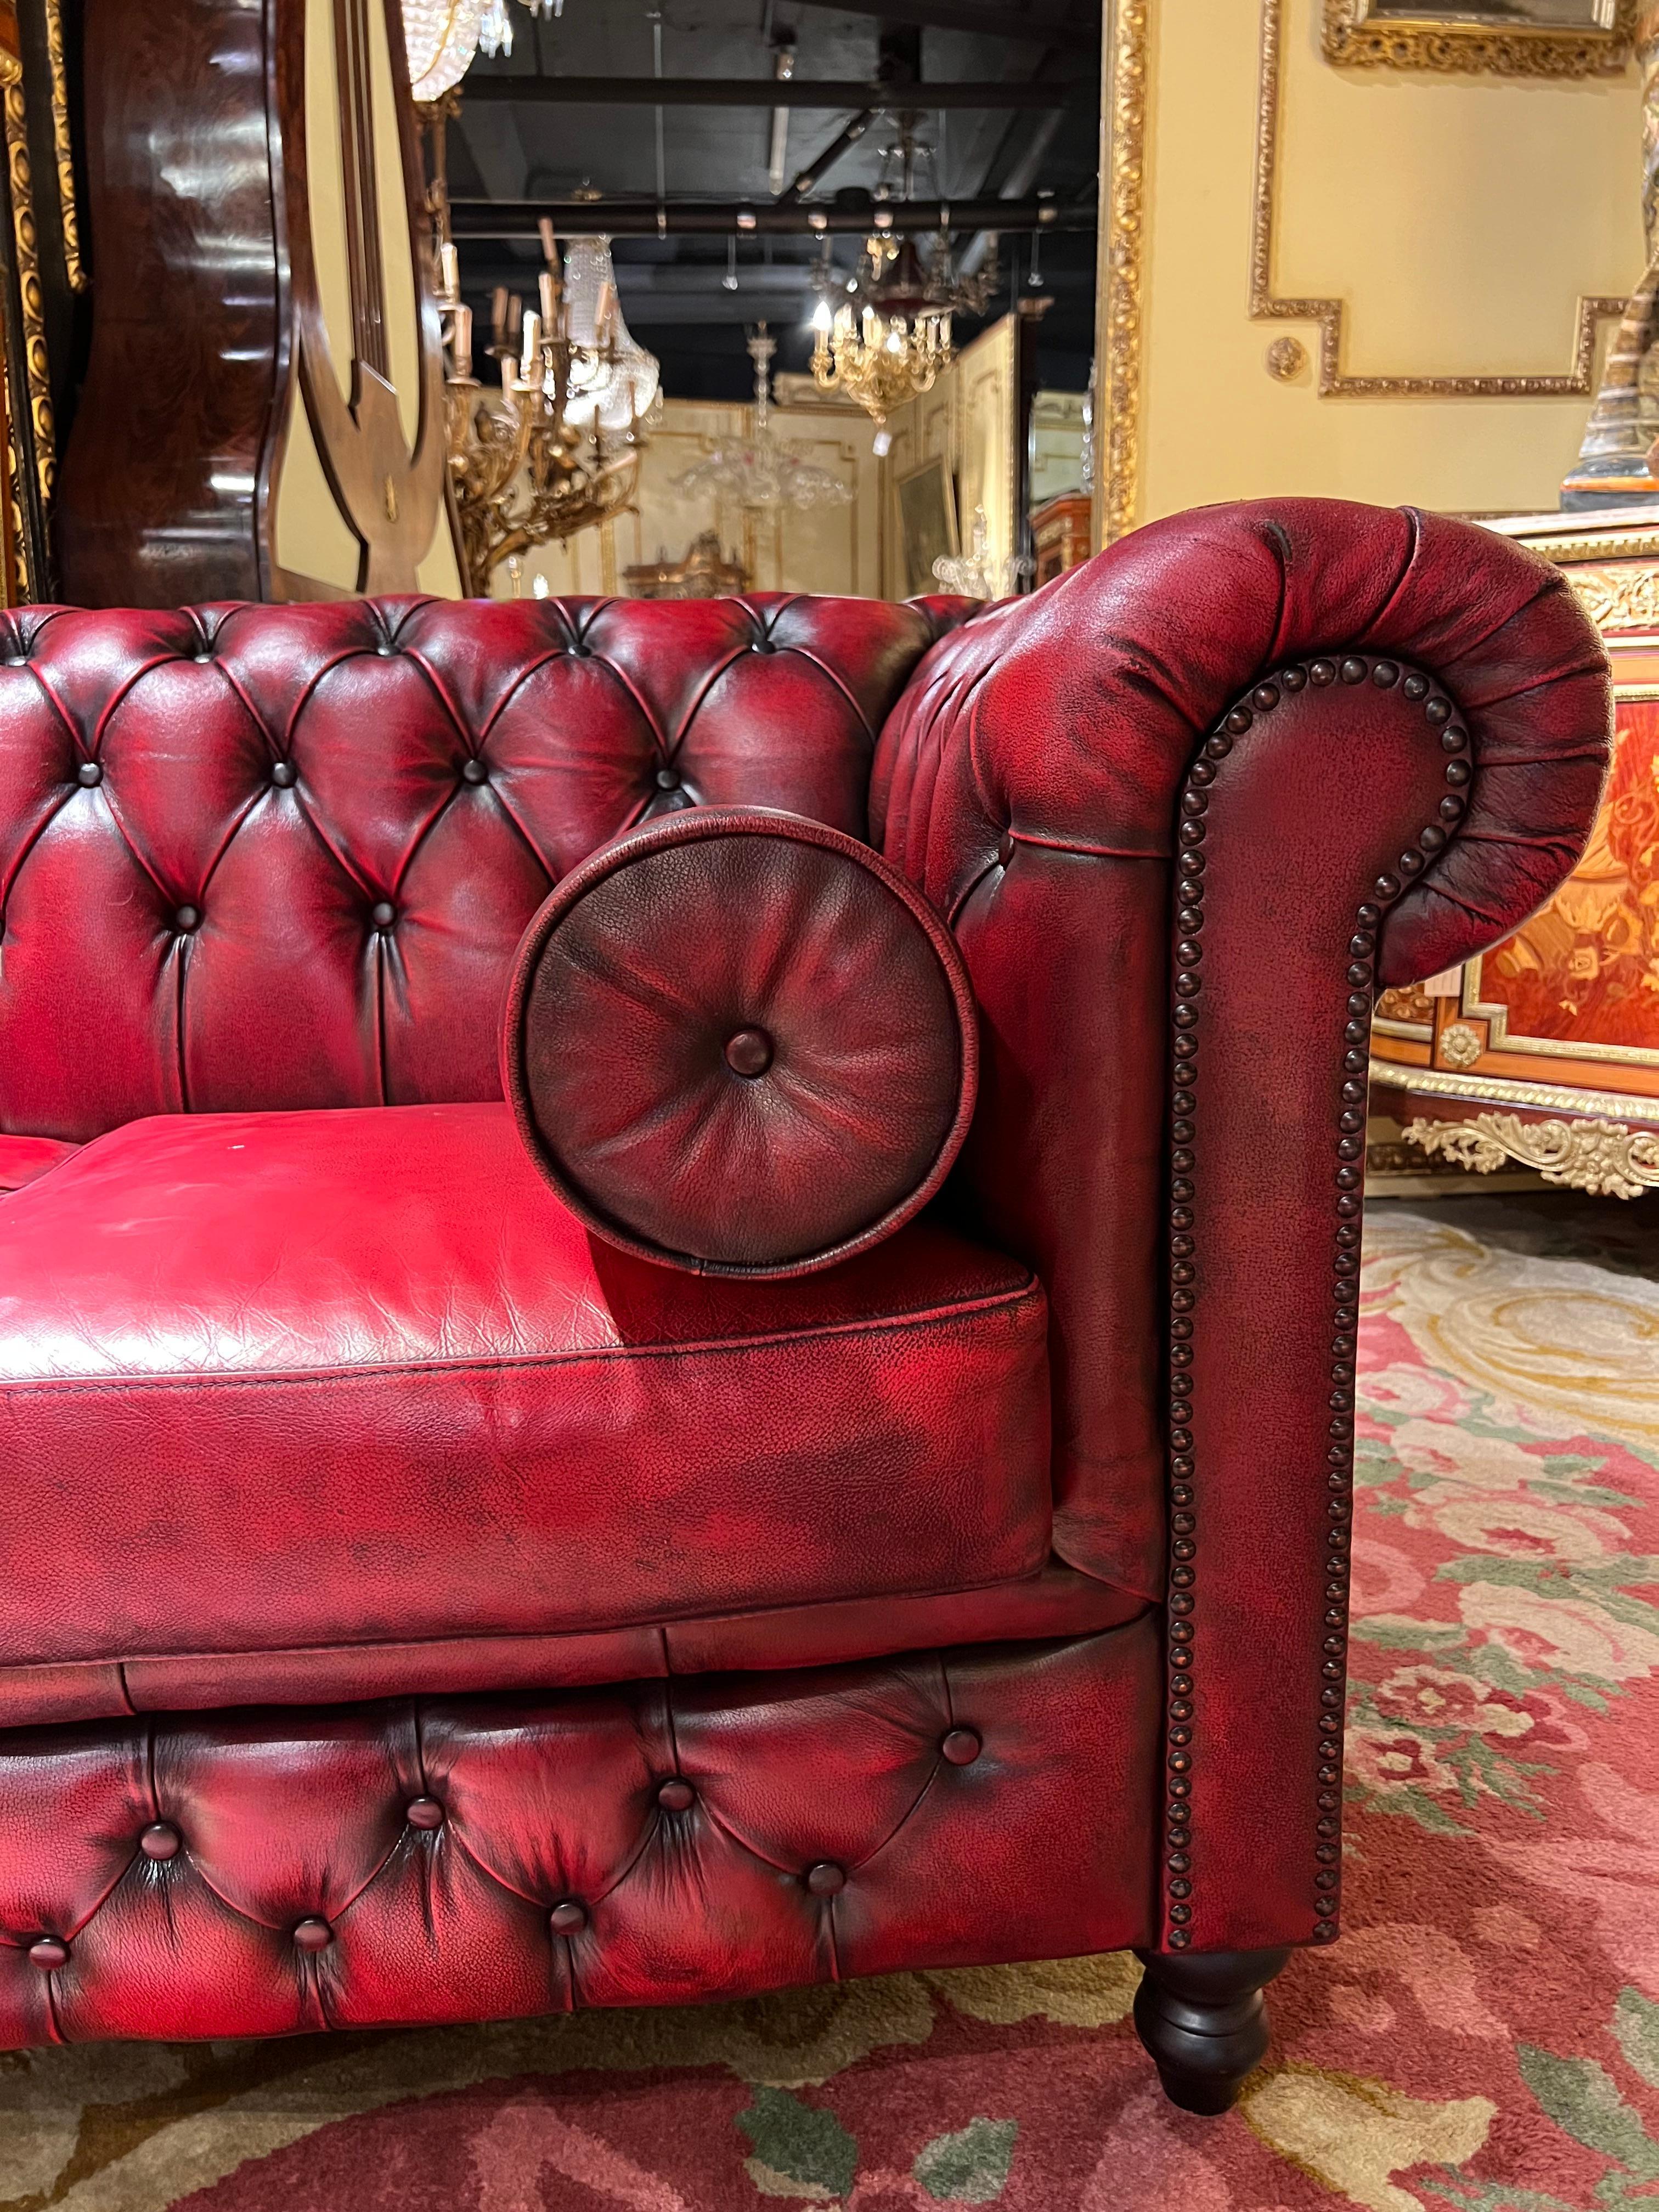 Leather Vintage oxblood Red Chesterfield Corner Couch or Seven Seater Sofa / Set